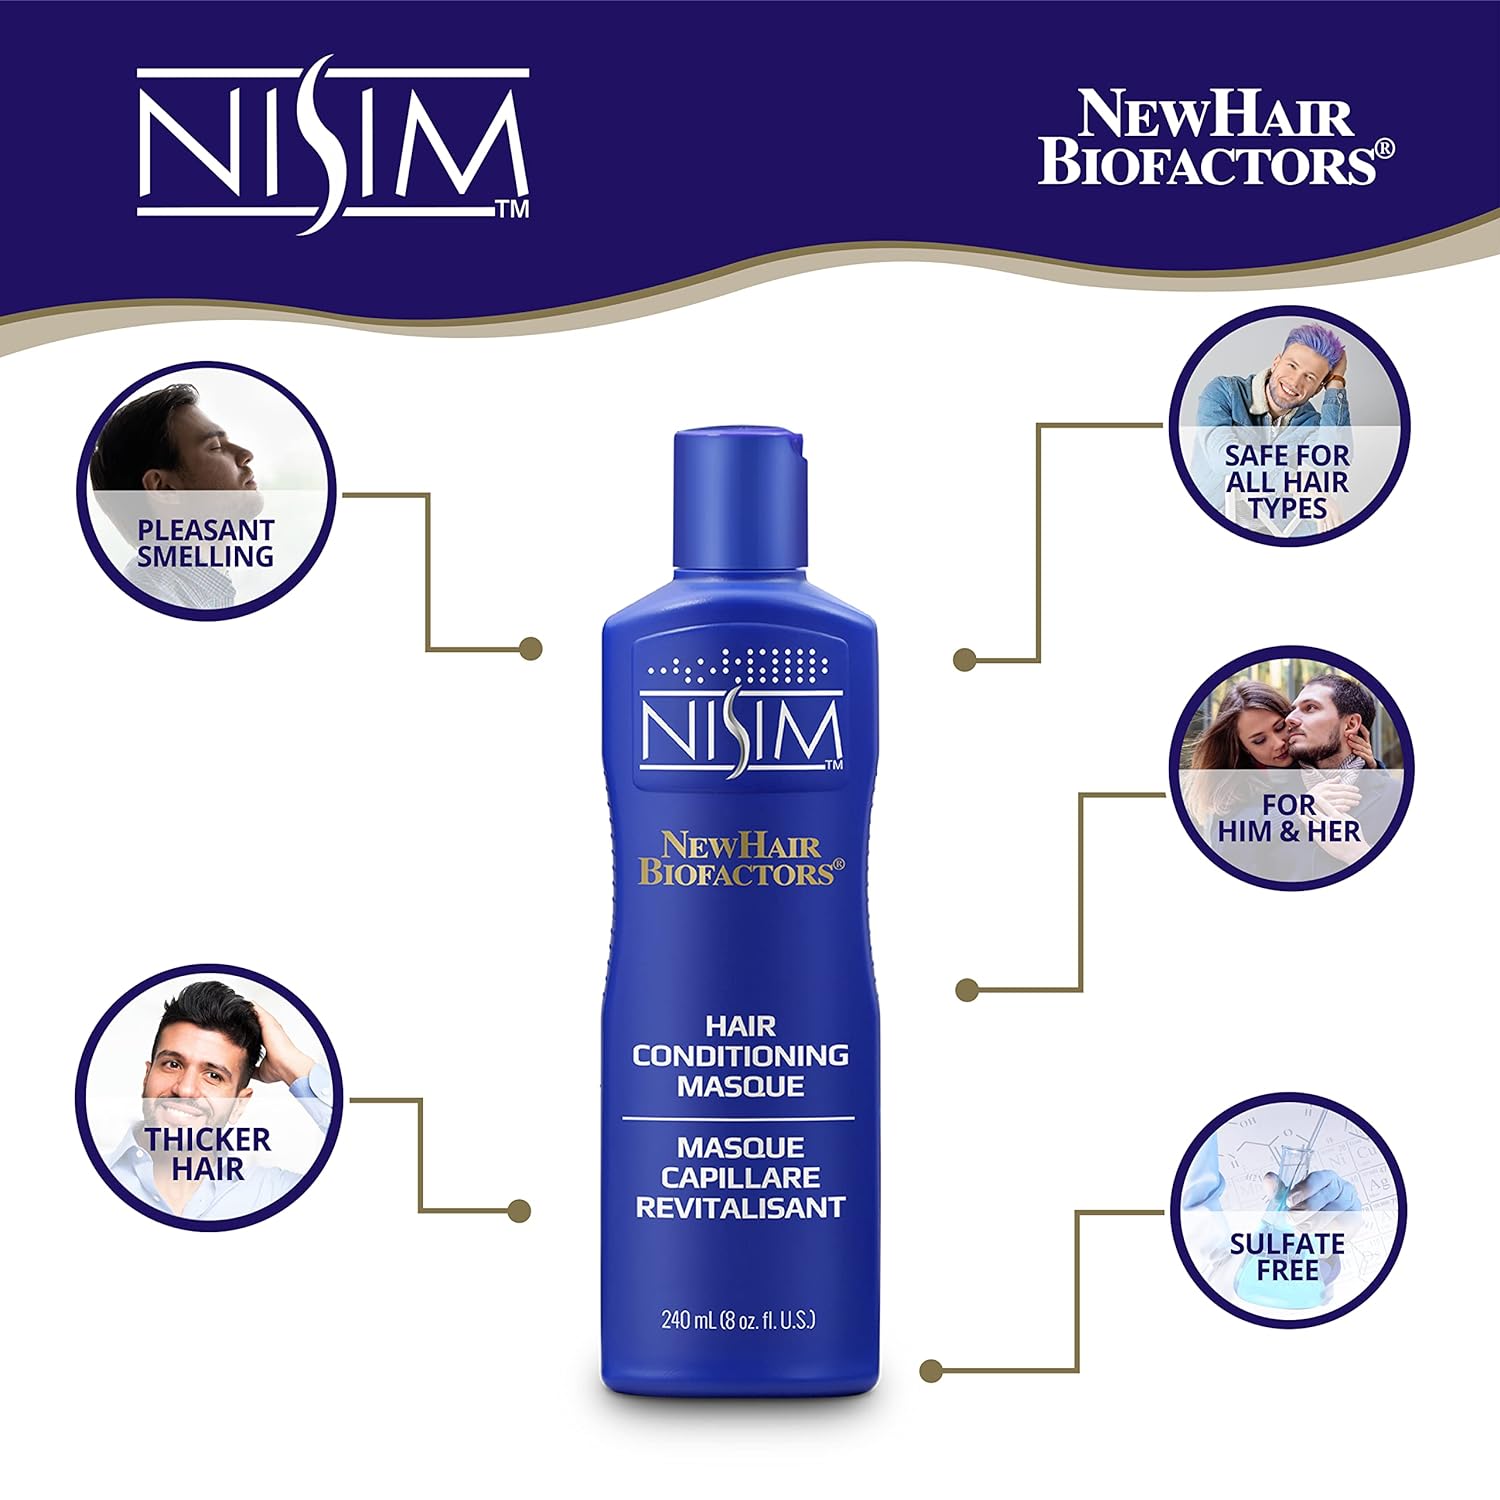 Nisim Hair Conditioning Masque - 8 Ounce (240 milliliter) : Beauty & Personal Care